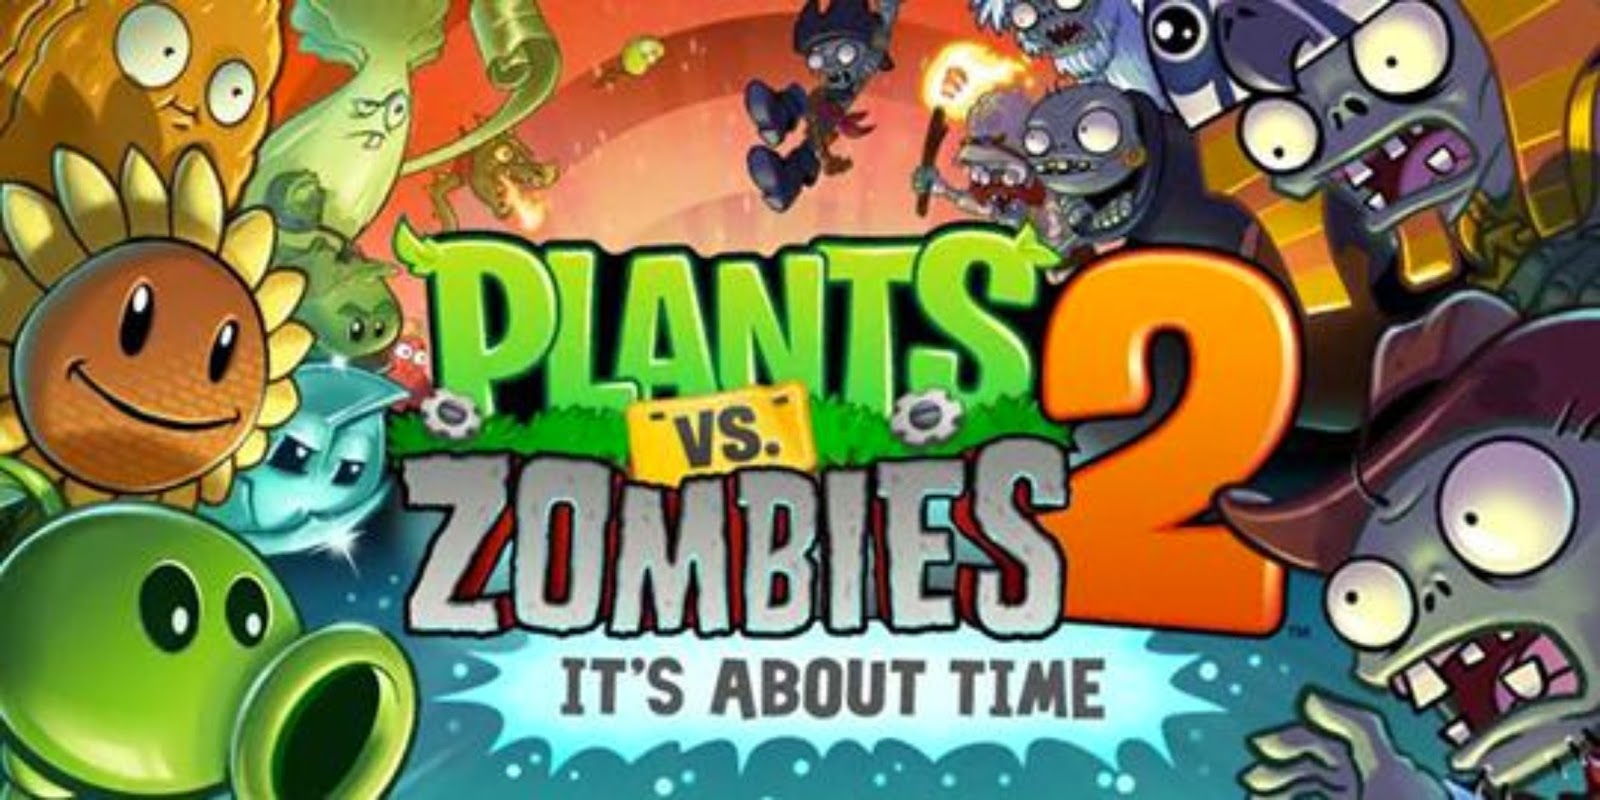 Plants vs Zombies 2 Android Apk Data Free Full